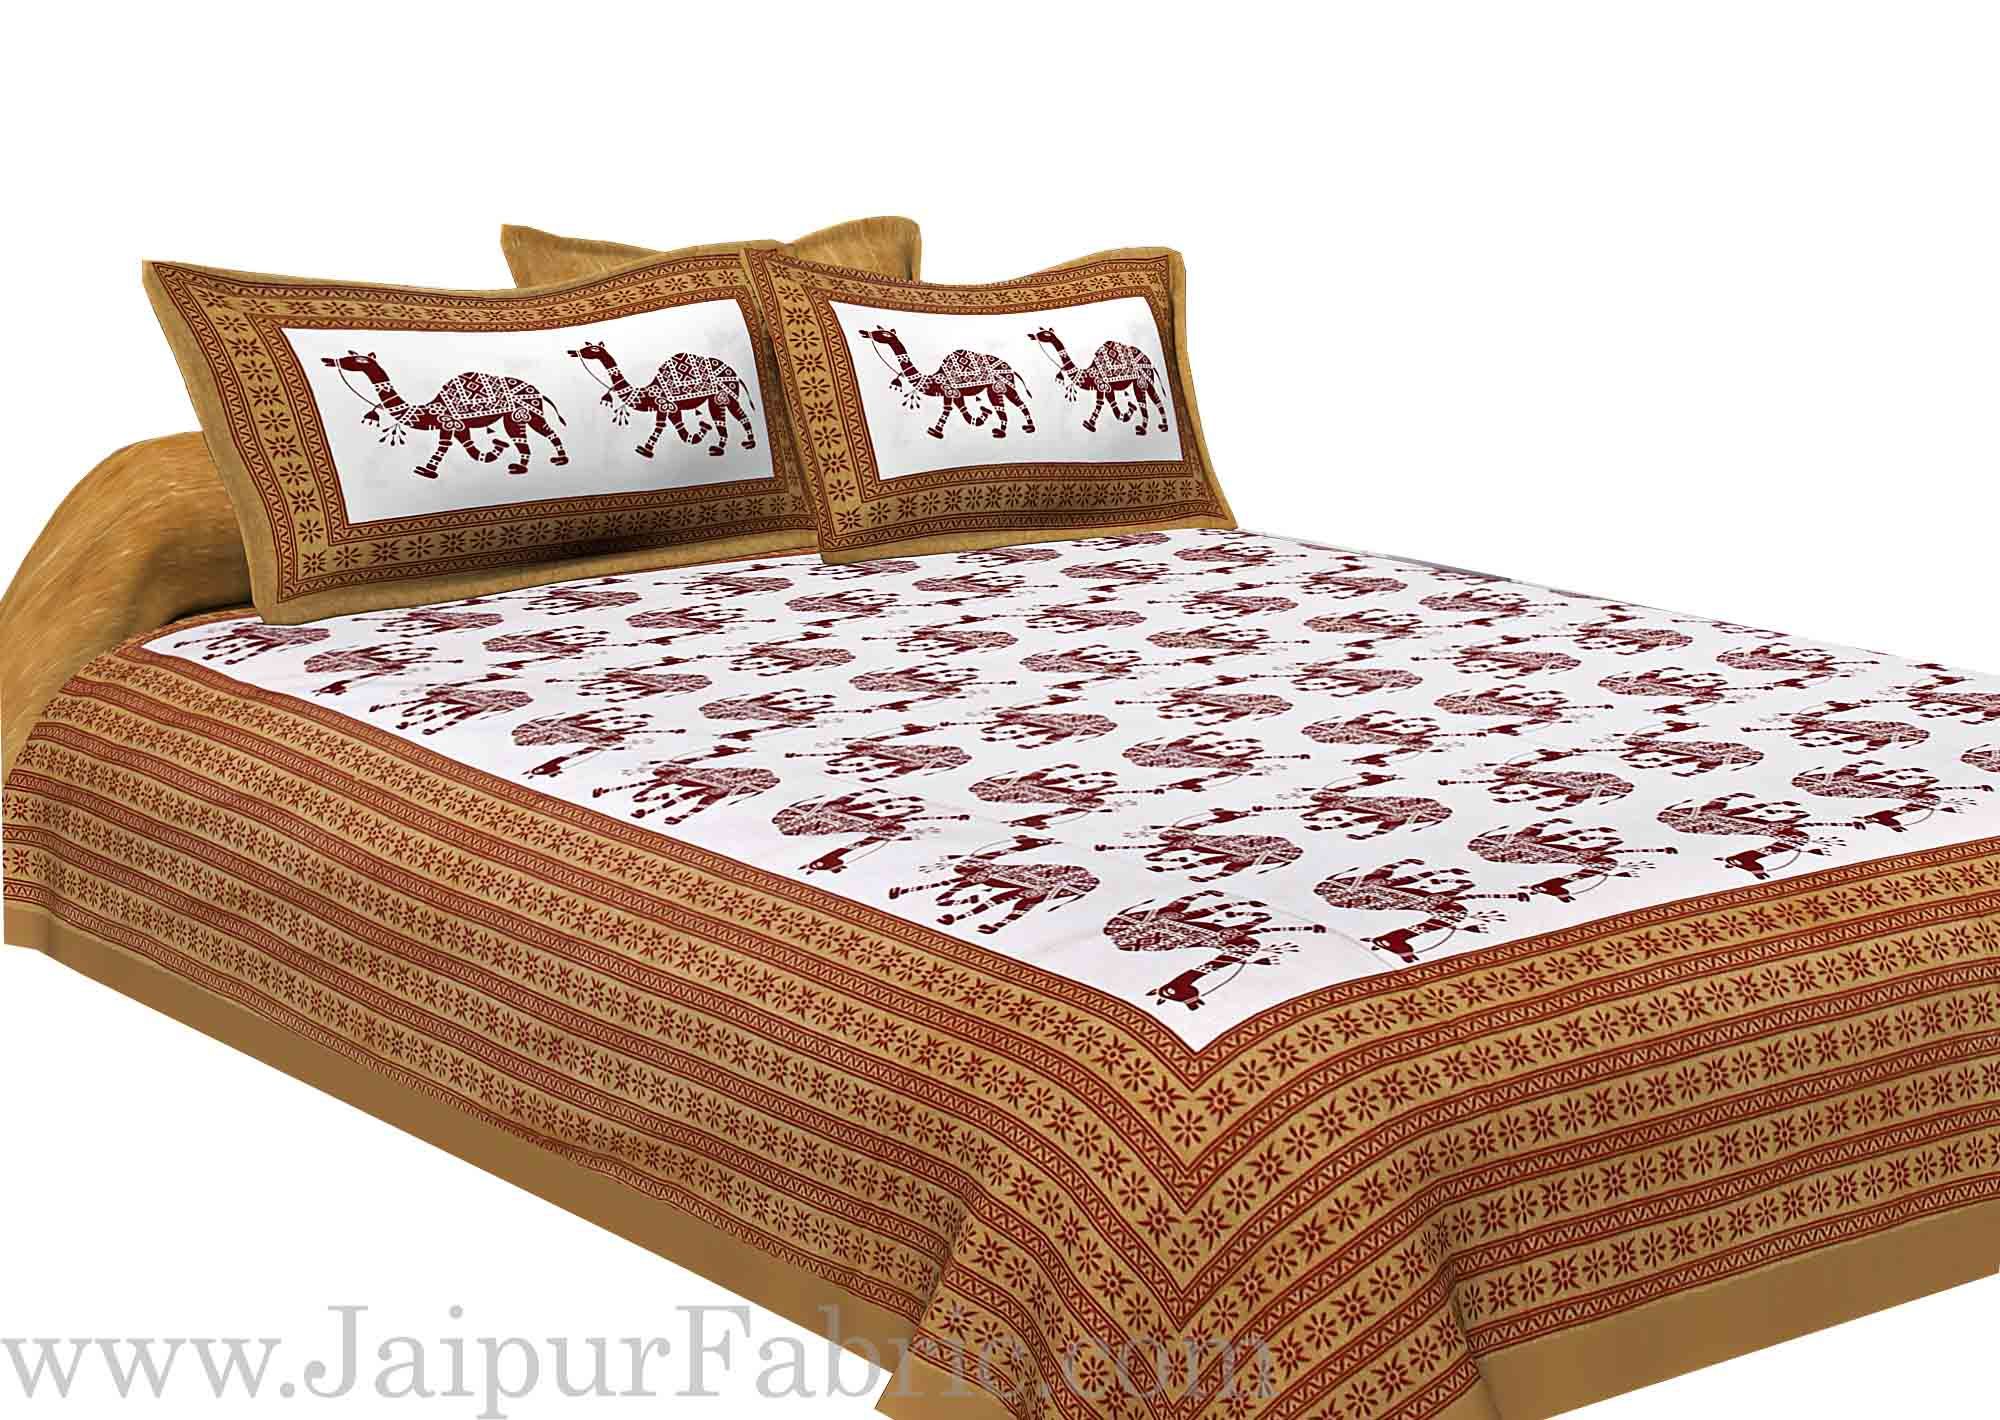 Brown Camel Print Cotton Double Bed Sheet